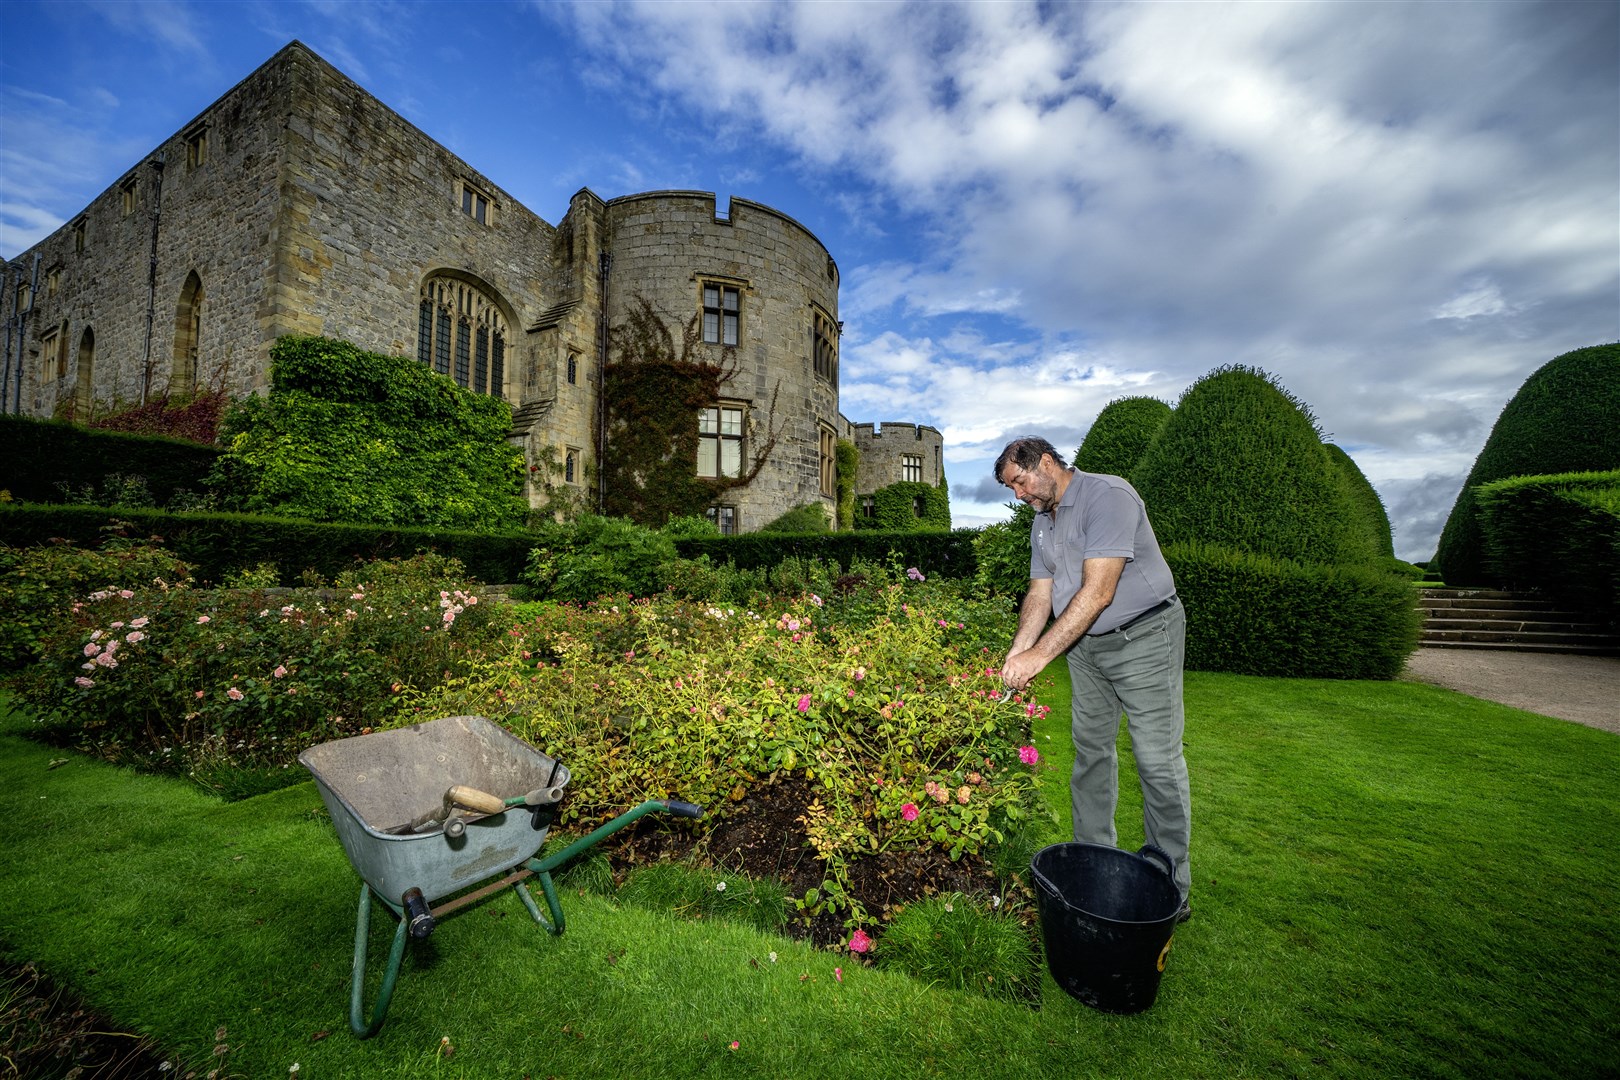 Dave Lock said he will miss the garden, the people, and the comradery of working at Chirk Castle (Peter Byrne/PA)